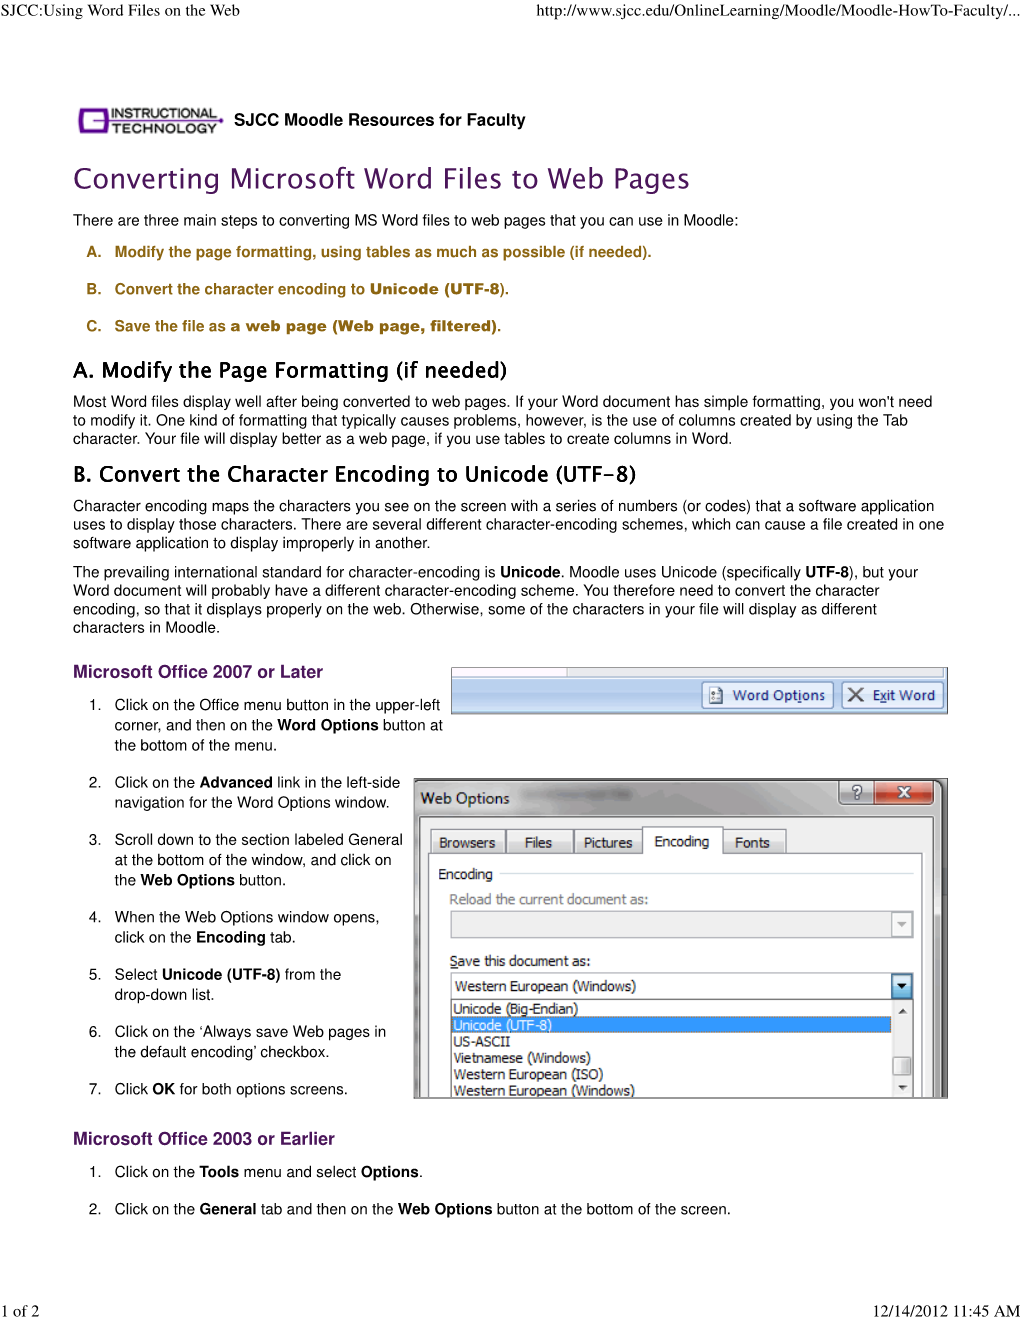 Converting Microsoft Word Files to Web Pages